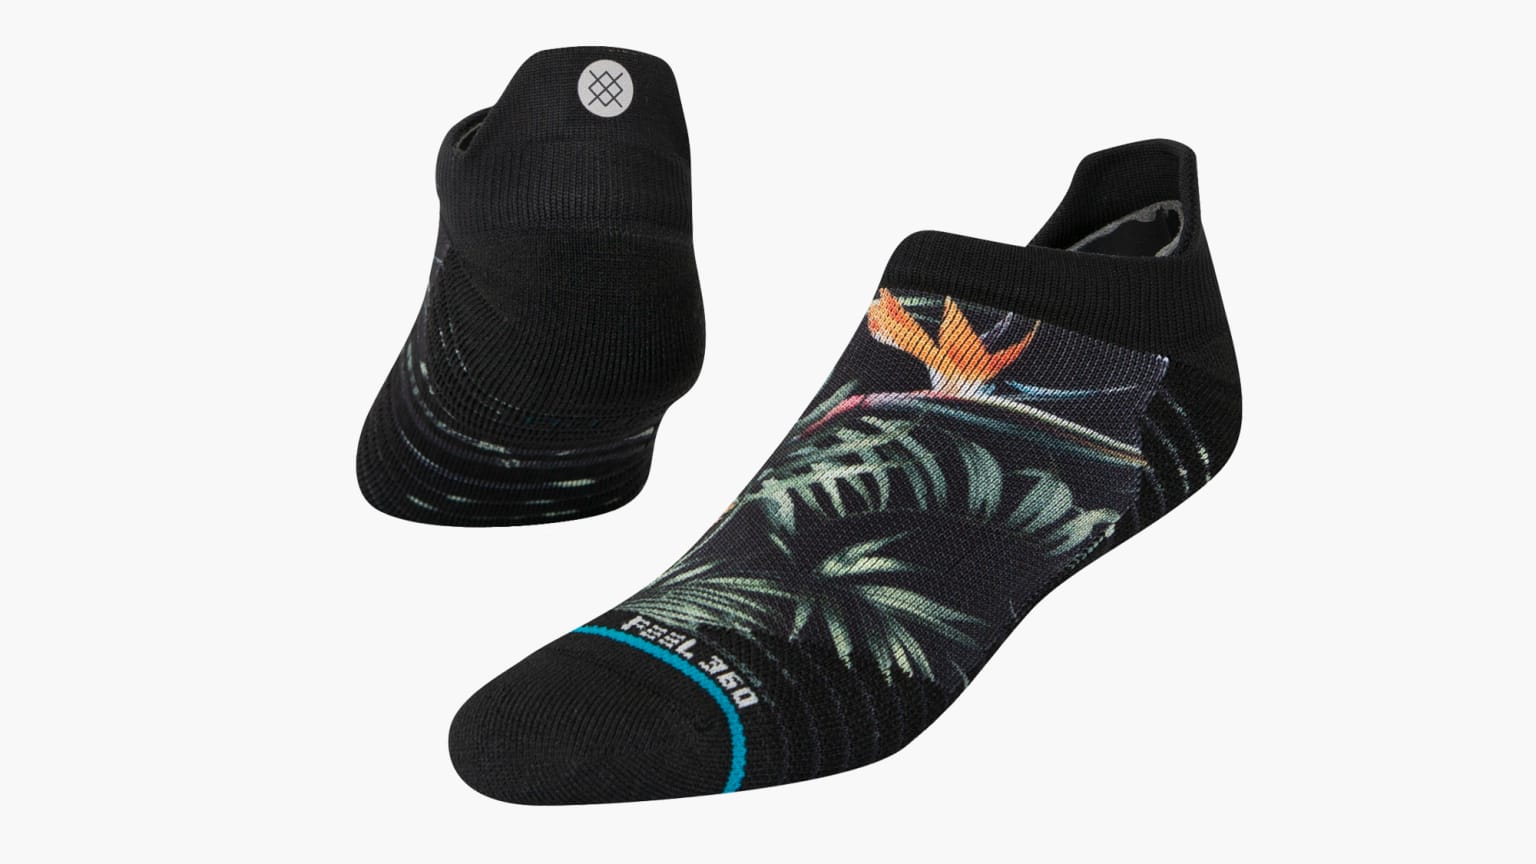 Stance Socks "The Fourth" Large FREE SHIPPING 